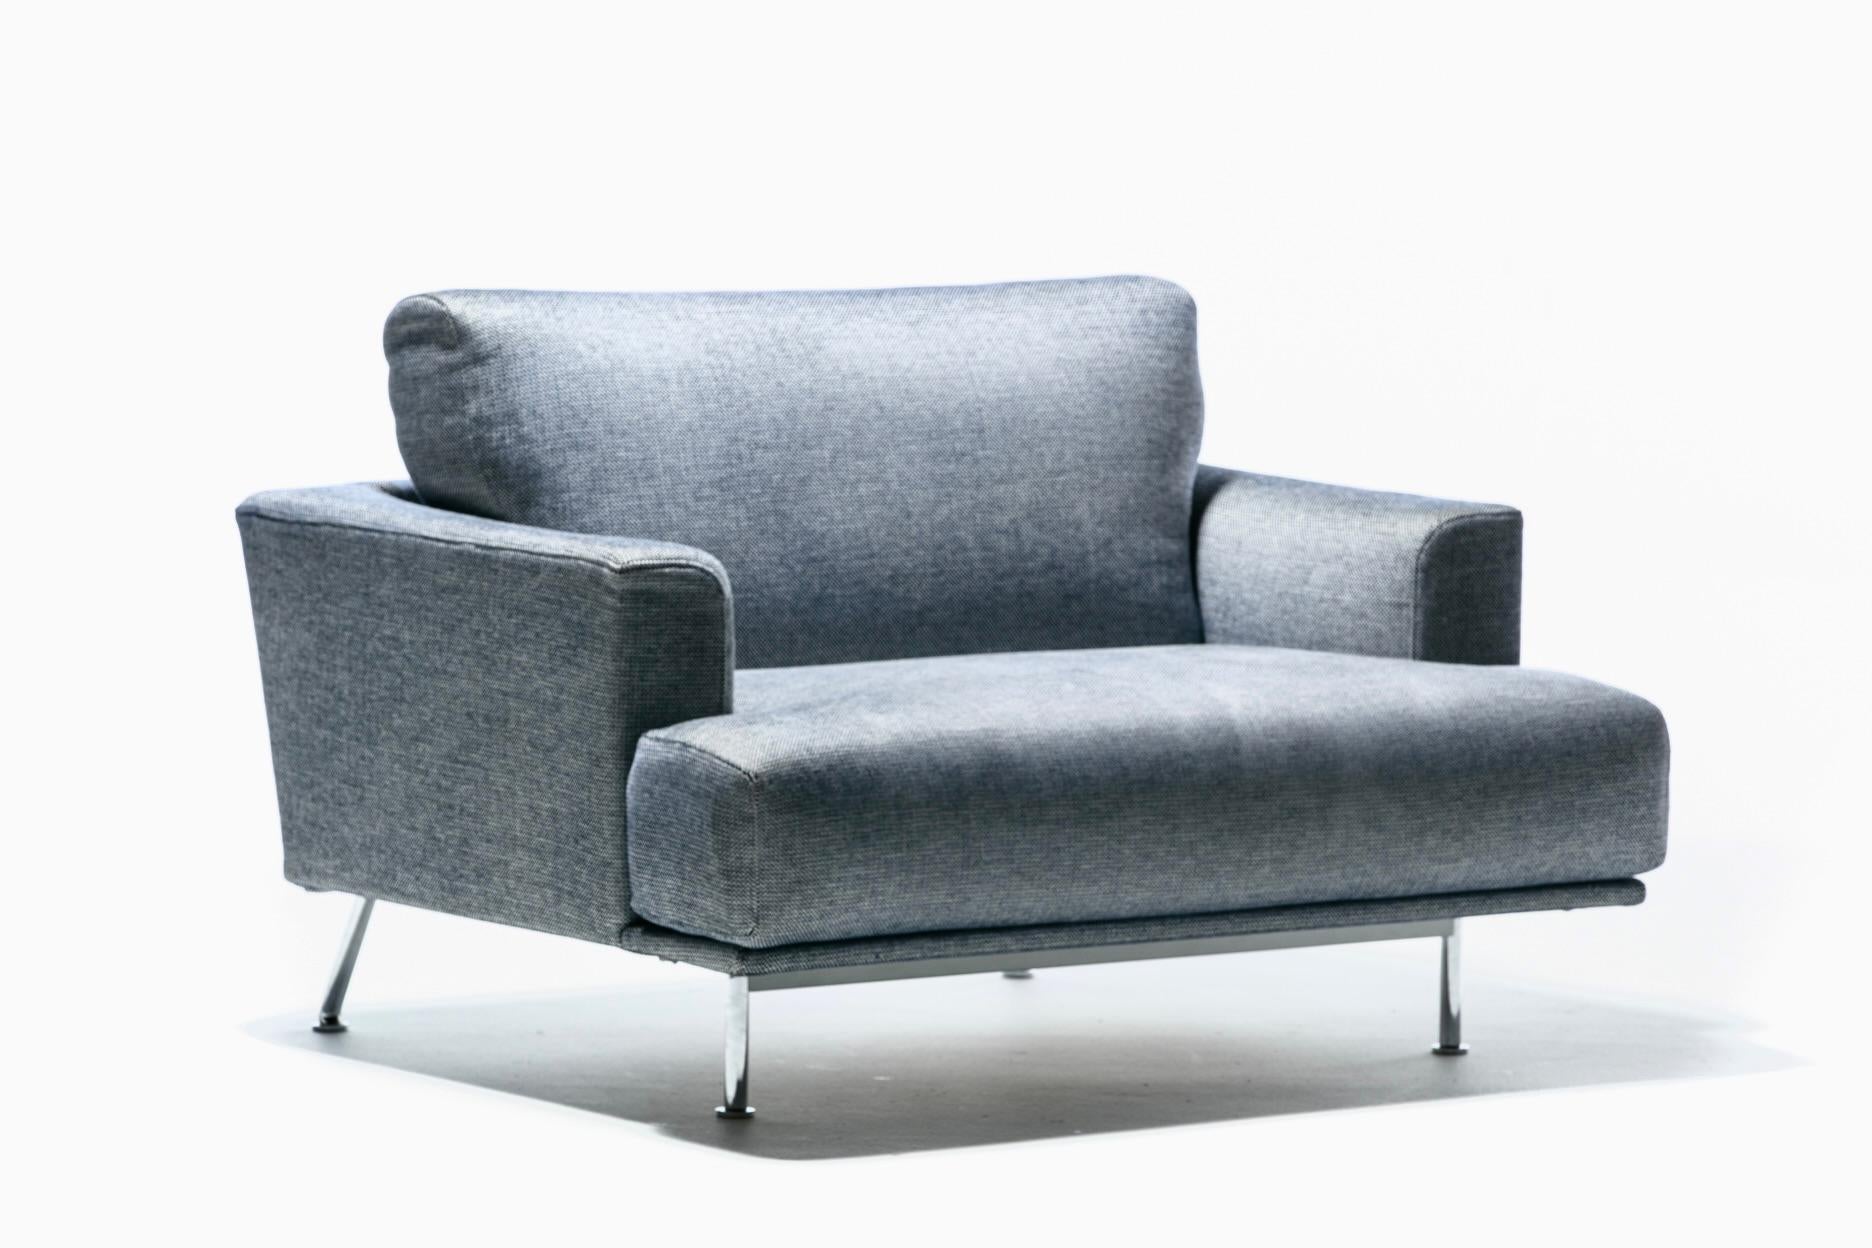 Pair of Imported Italian Modern Cassina 253 Nest Lounge Chairs by Piero Lissoni  6